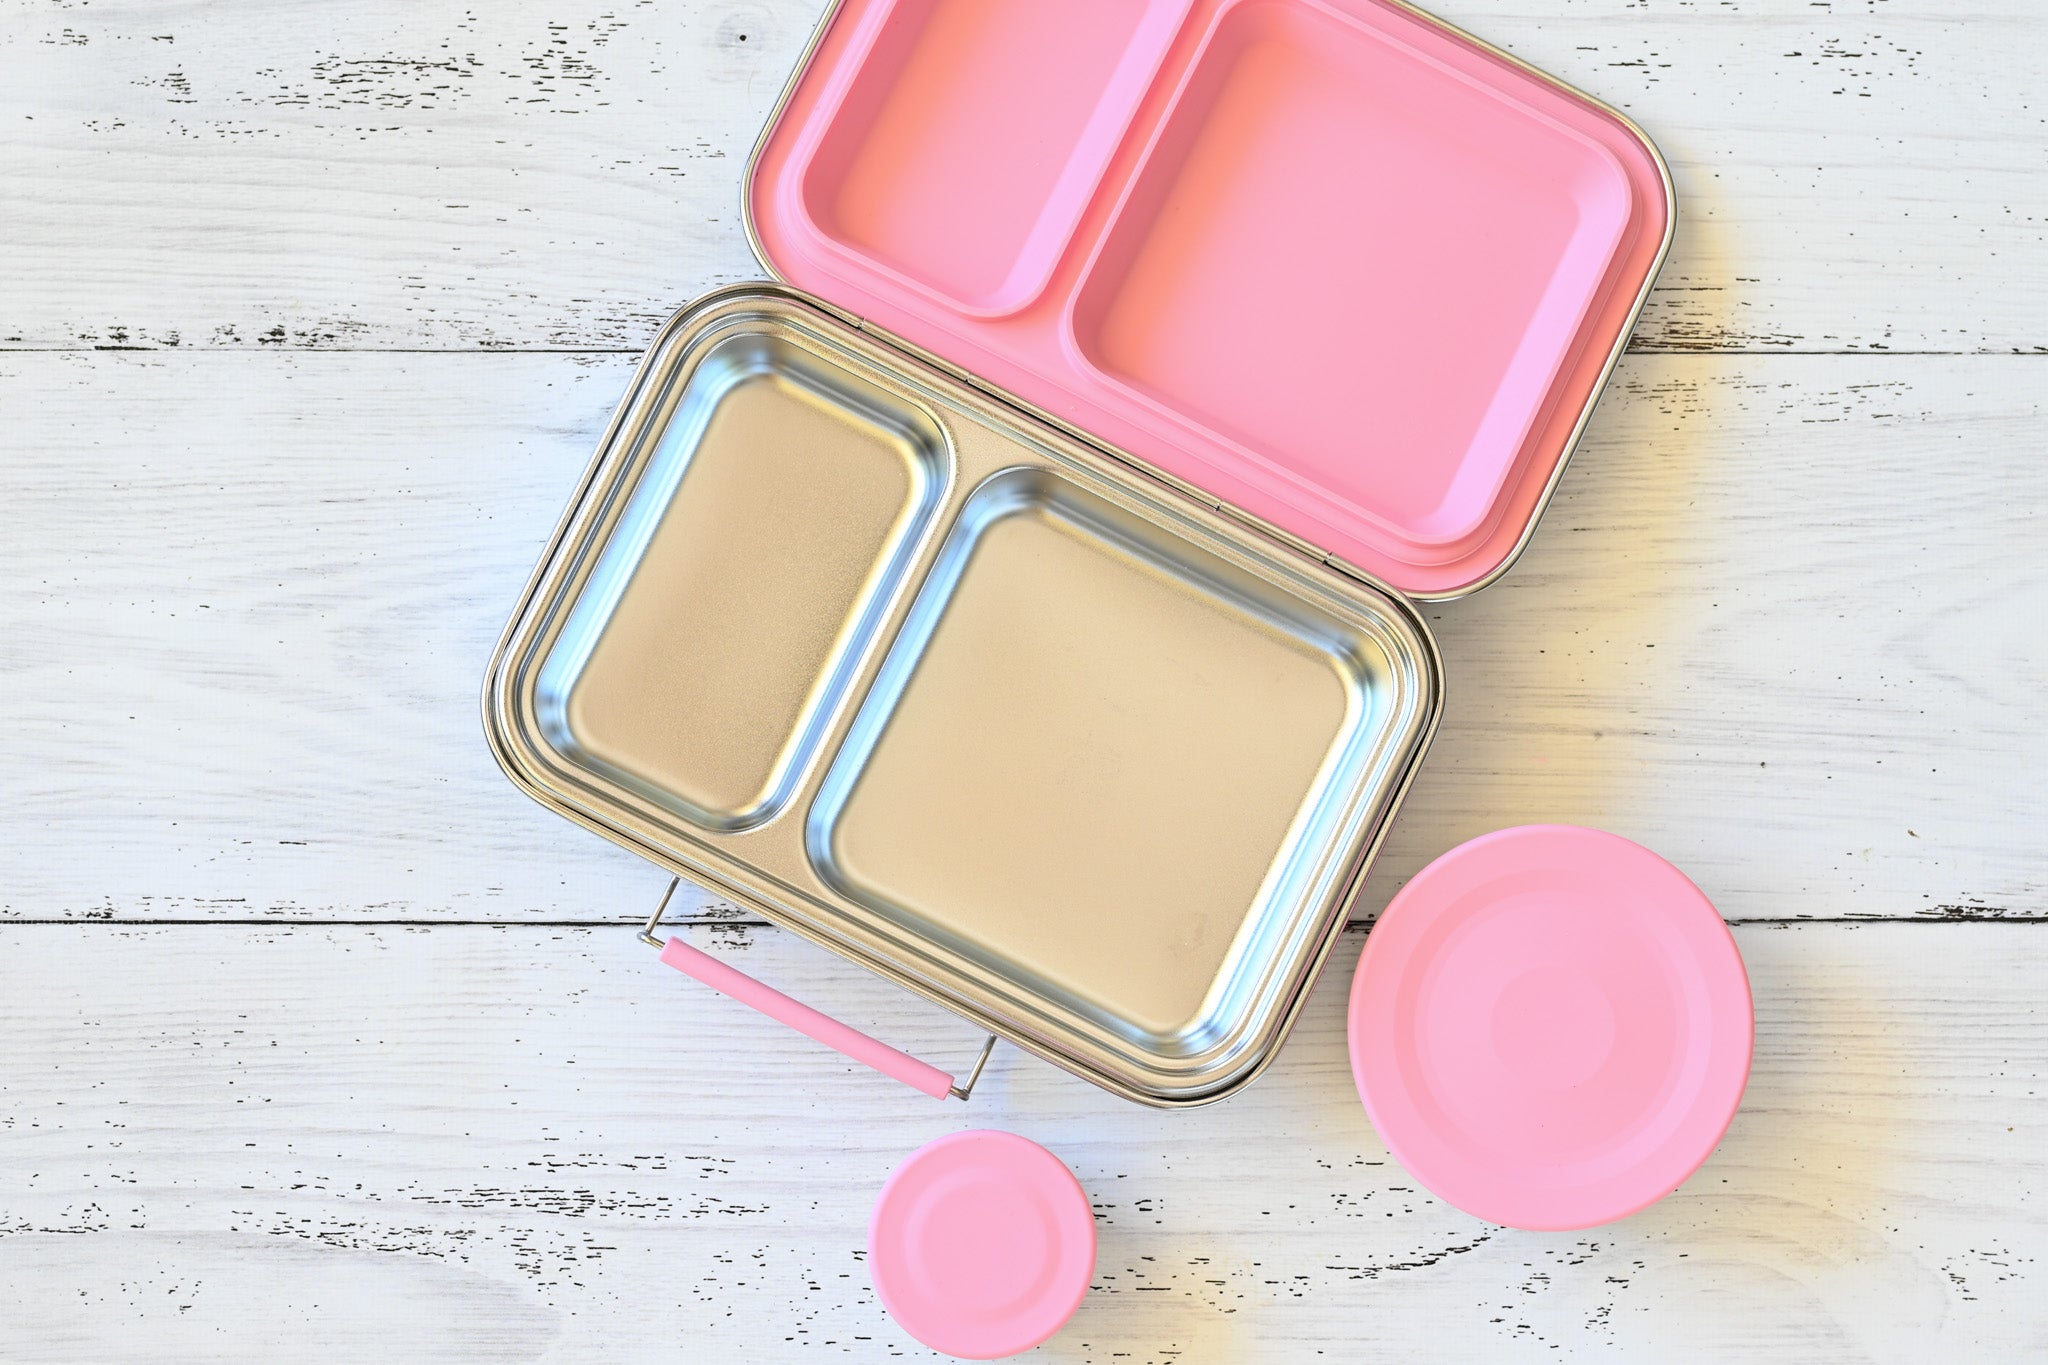 2 compartment stainless steel lunch box with pink silicone seal - nudie rudie lunchbox 